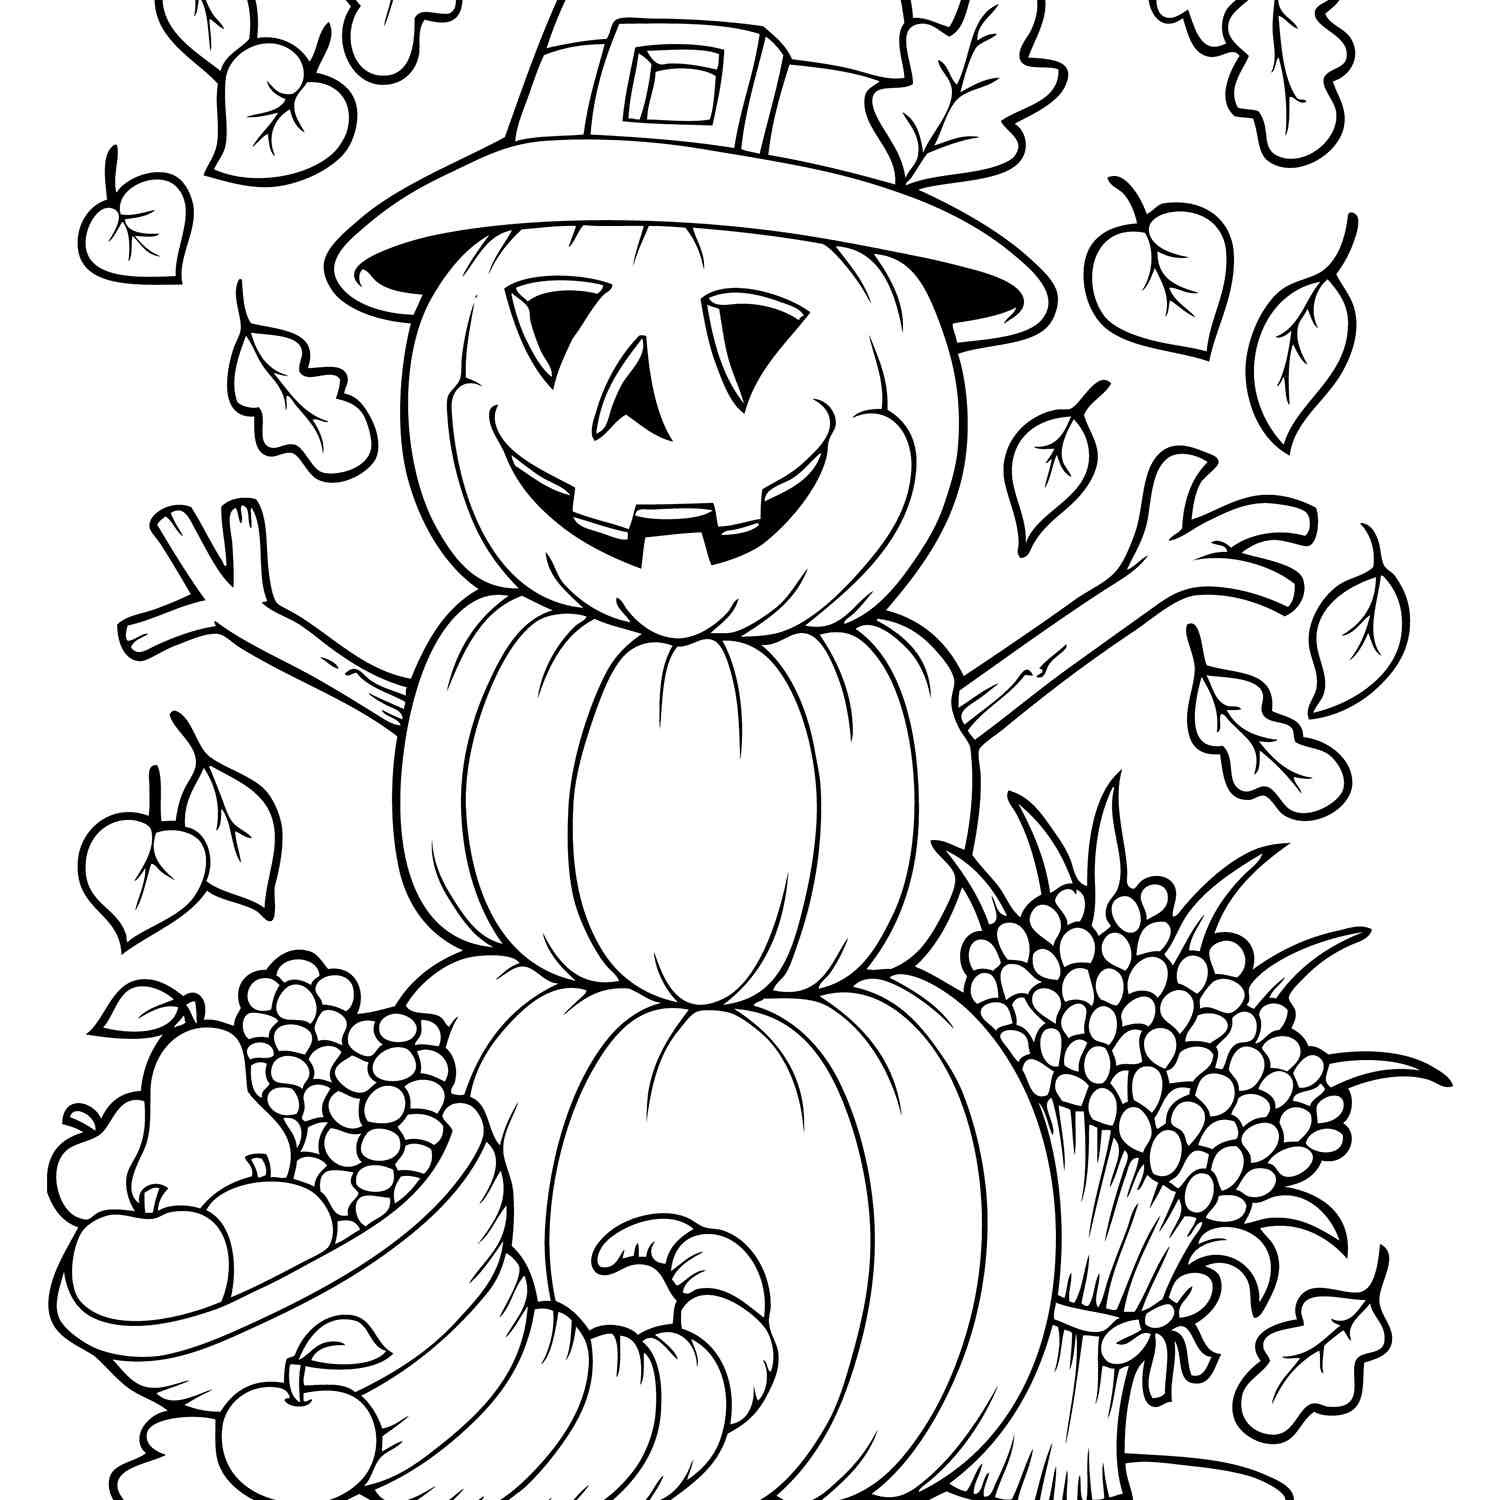 Free Fall Printable Coloring Pages
 Free Autumn and Fall Coloring Pages